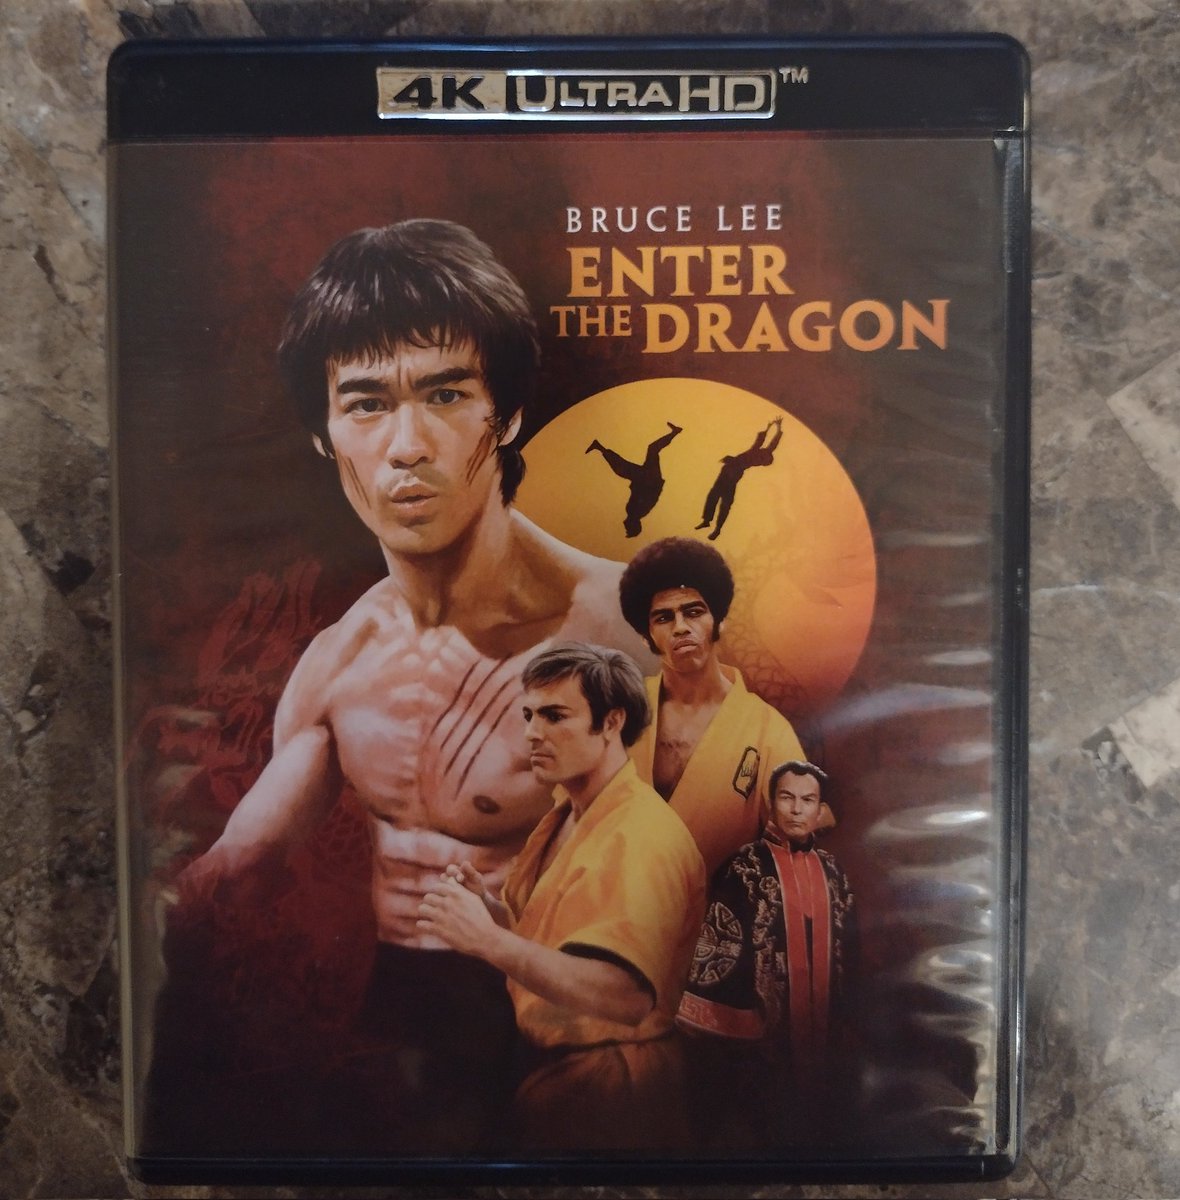 Good Kickass Friday afternoon, #MutantFam and #Horrorfam! I am #RNW Enter The Dragon (1973), and to watch Bruce Lee kick a lot of ass in this movie. #EnterTheDragon #PhysicalMedia